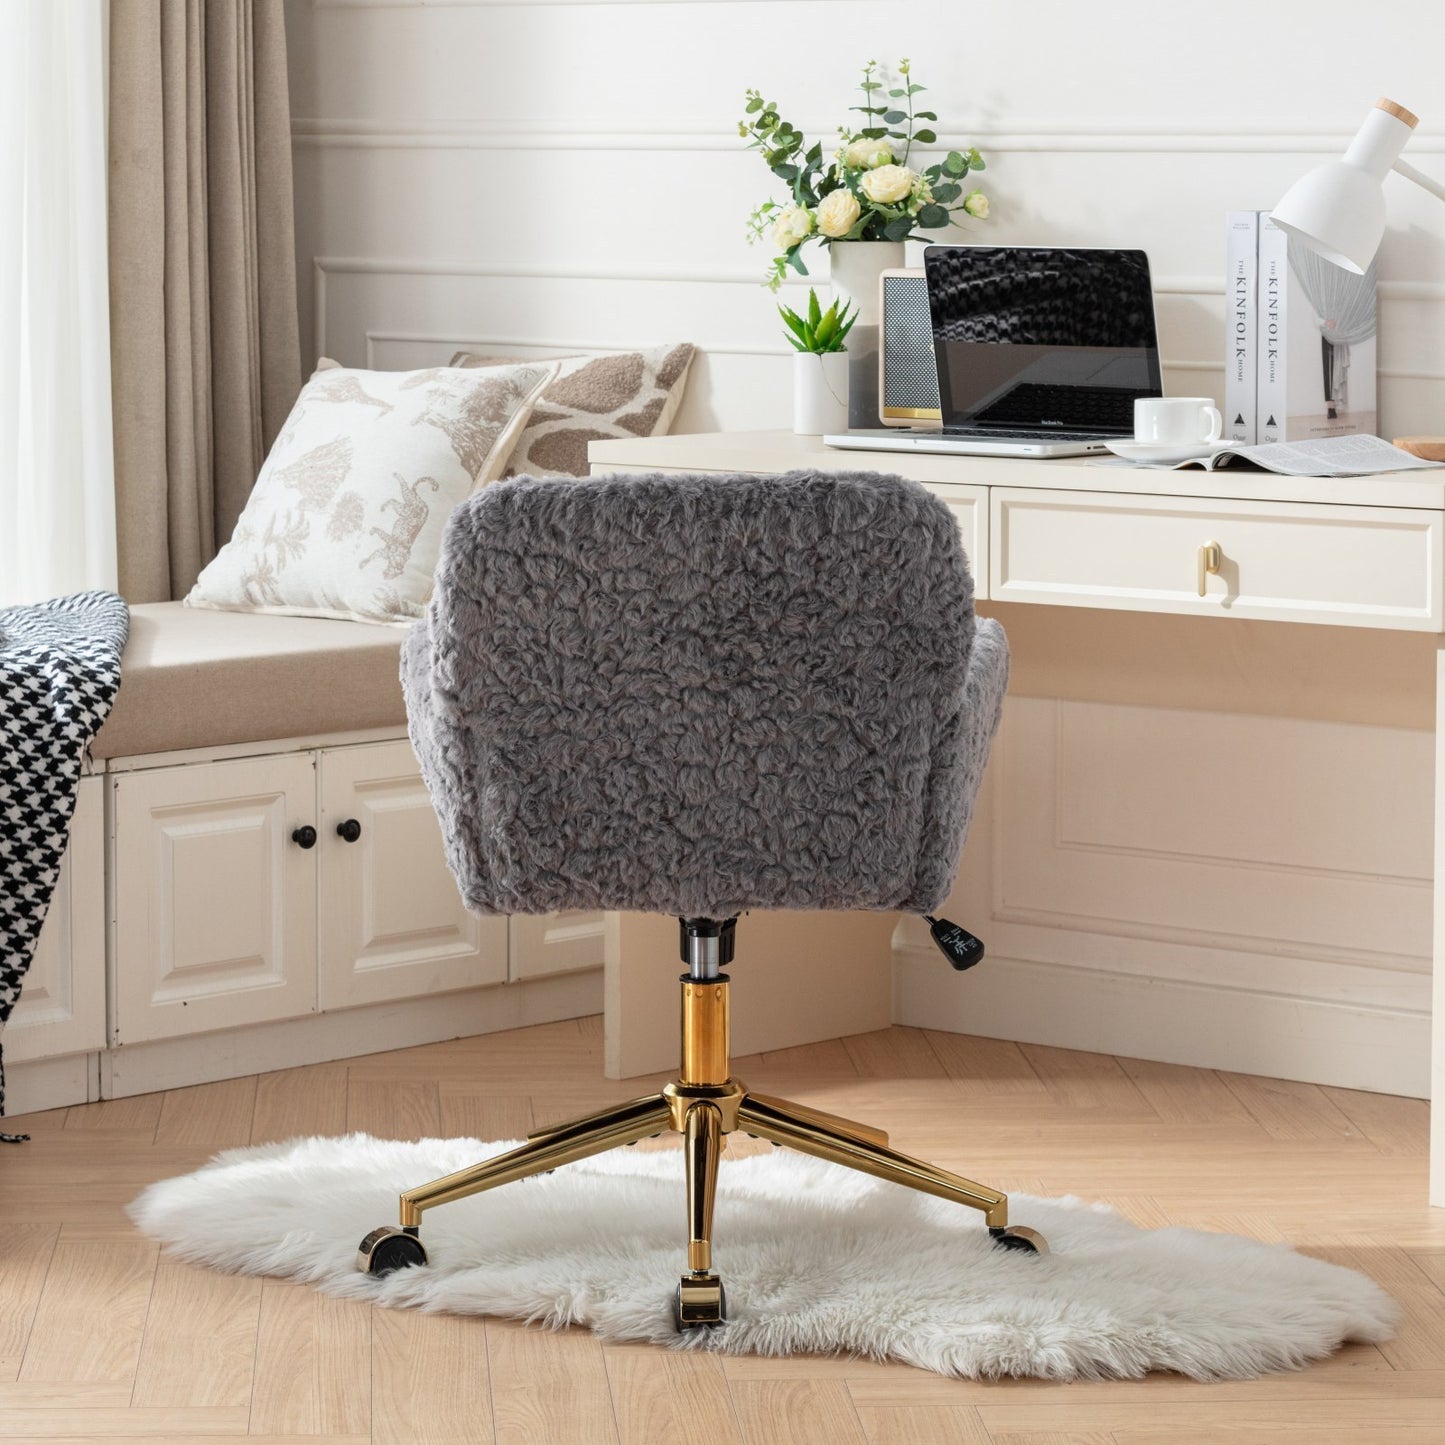 Furniture Office Chair,Artificial rabbit hair Home Office Chair with Golden Metal Base,Adjustable Desk Chair Swivel Office Chair,Vanity Chair(Gray)